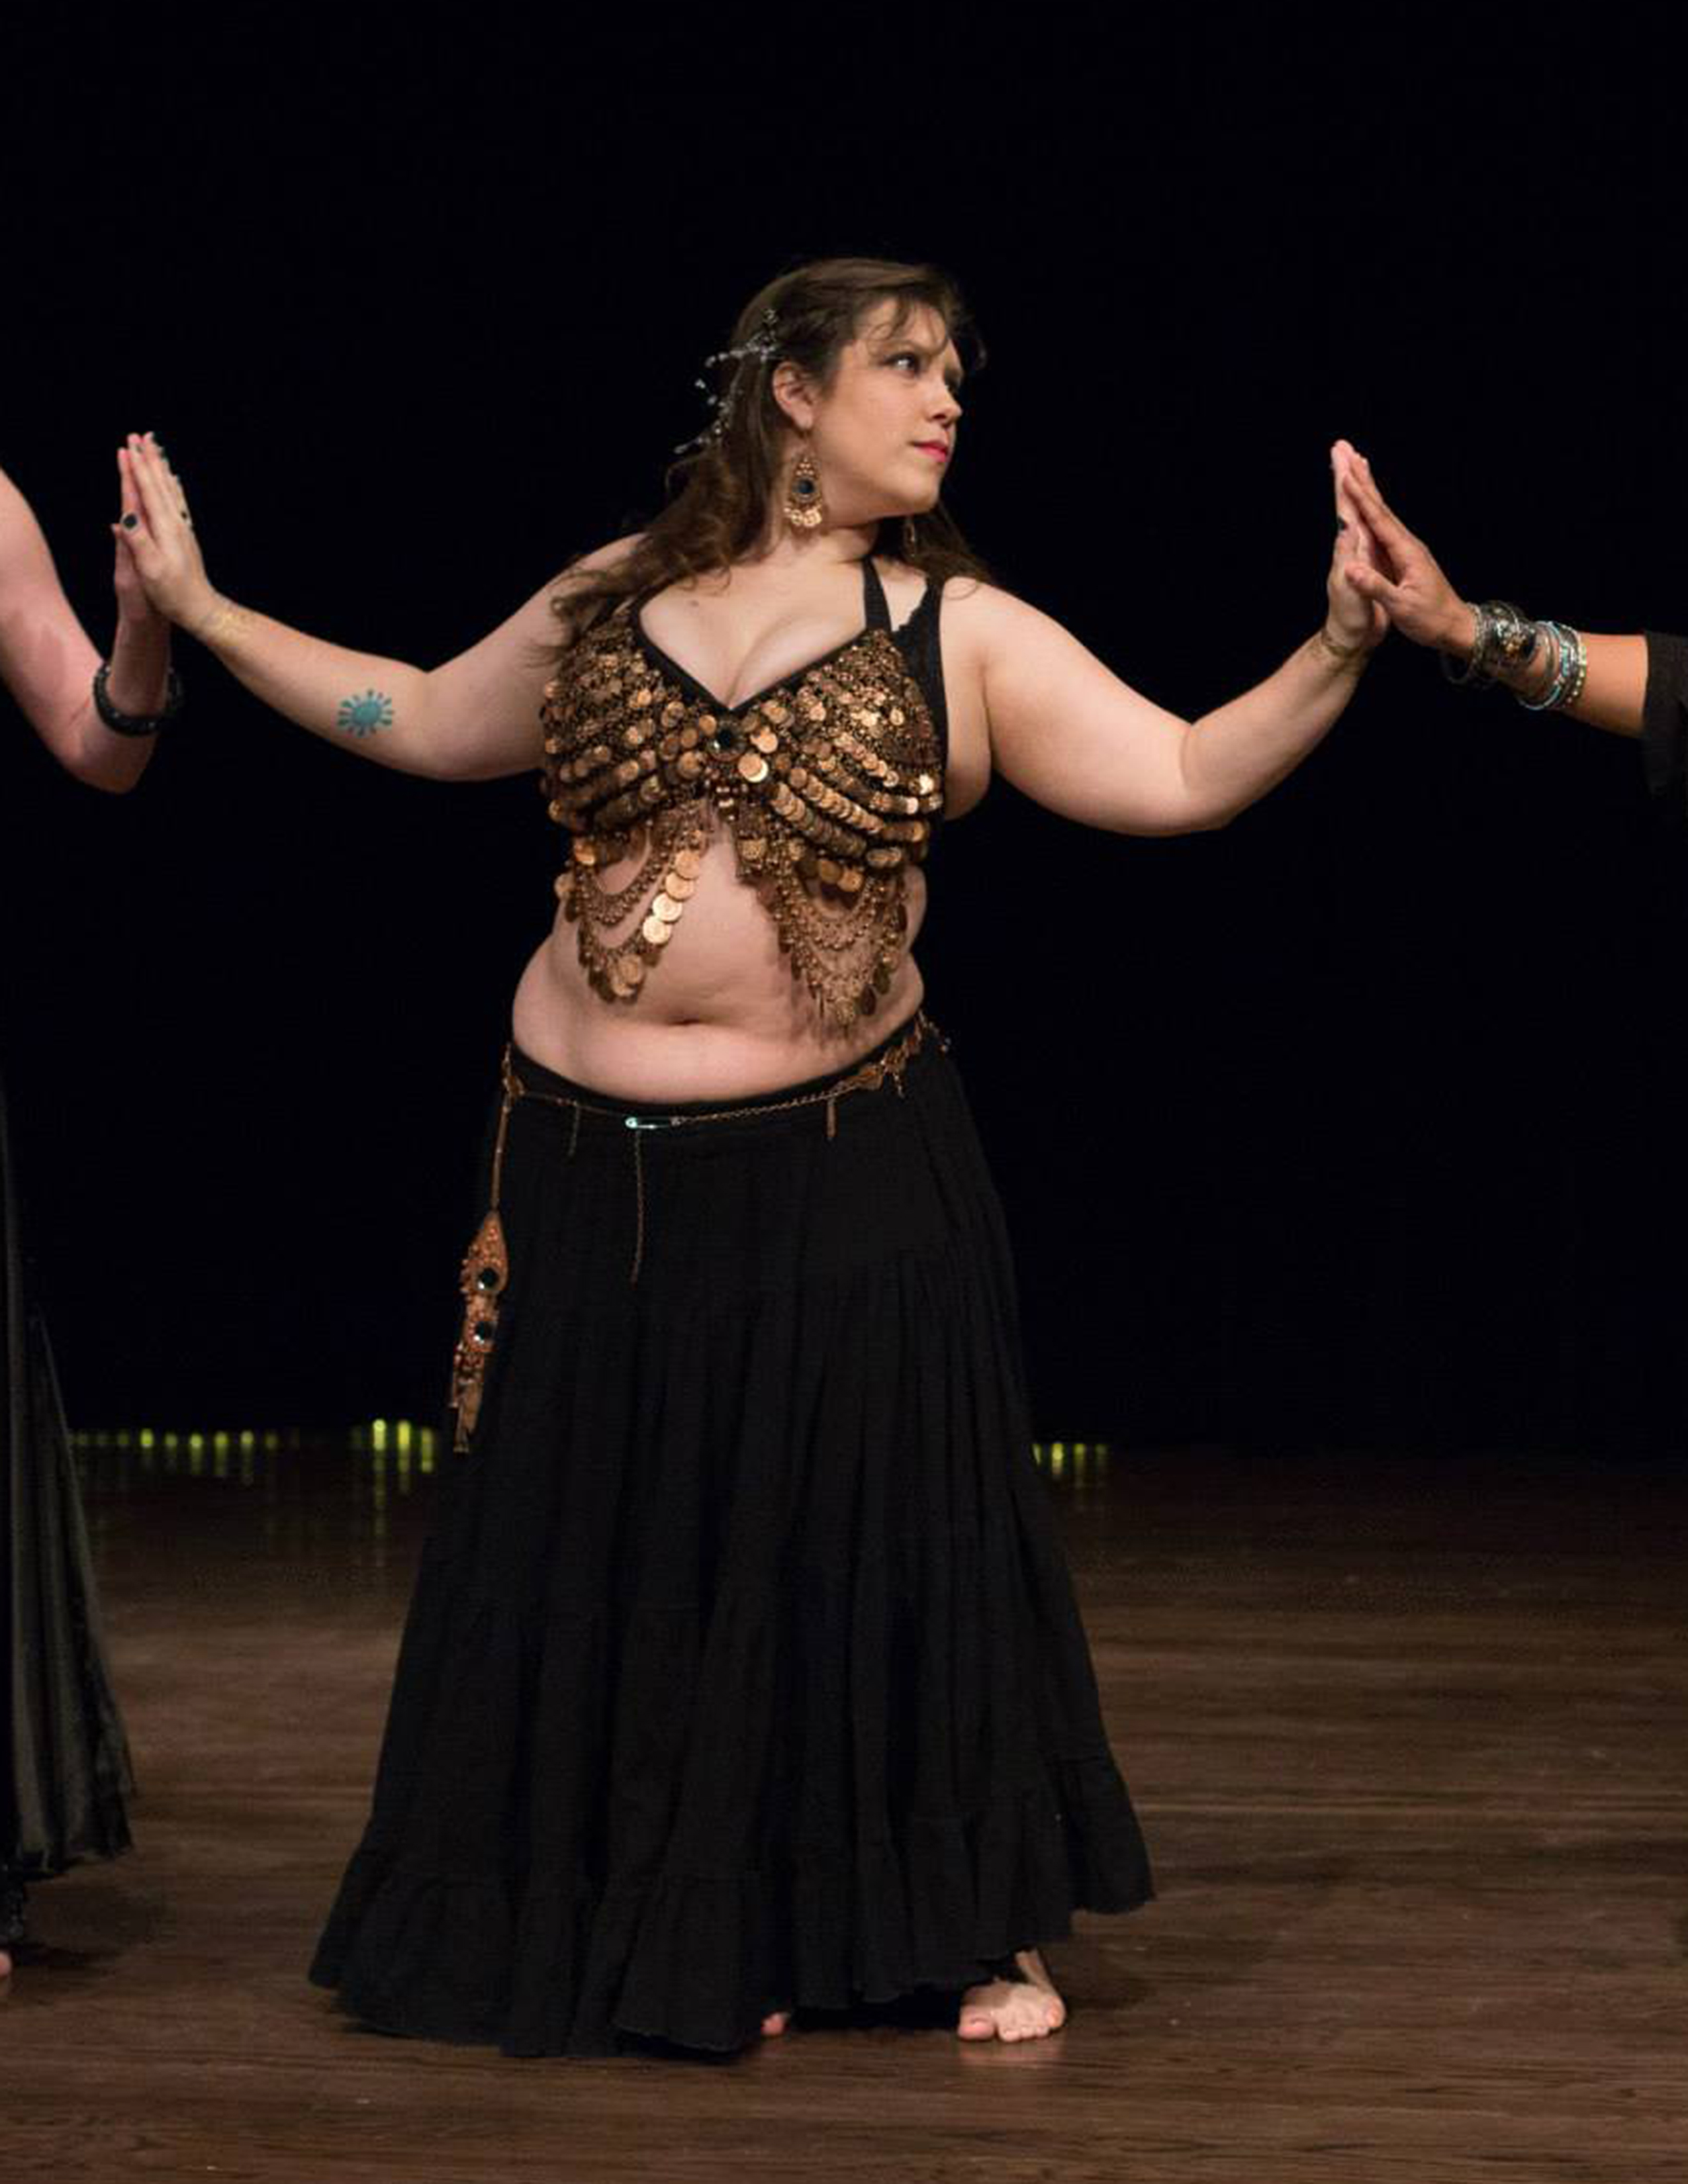 Michelle dancing Bloomington Belly Dances - 2015 in "All Along the Watchtower." 